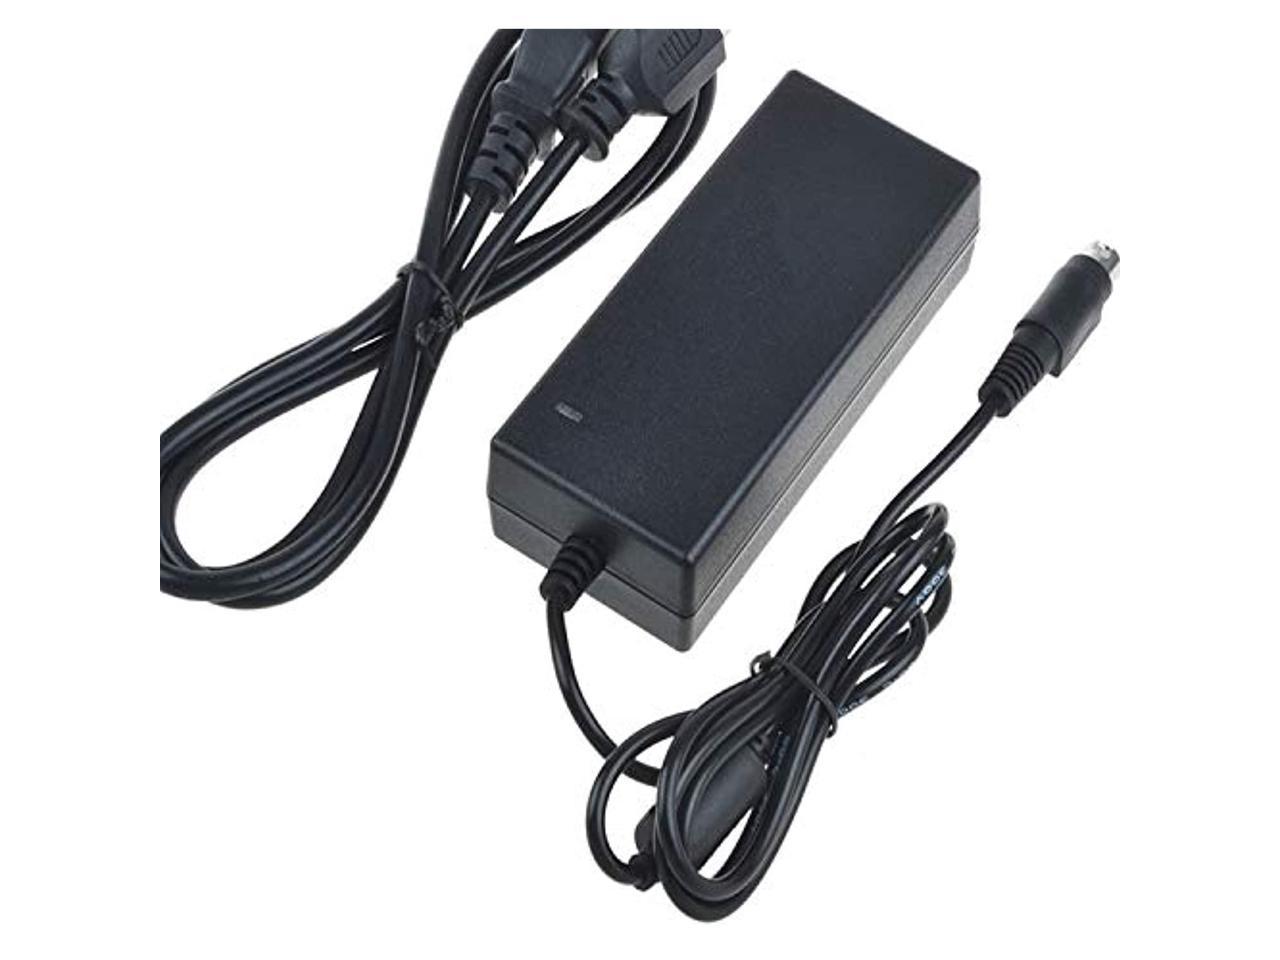 AC Adapter For Cricut KSAH1800250T1M2 18V Cutting Machine Power Supply Cord PSU Technical Specifications: Input Voltage